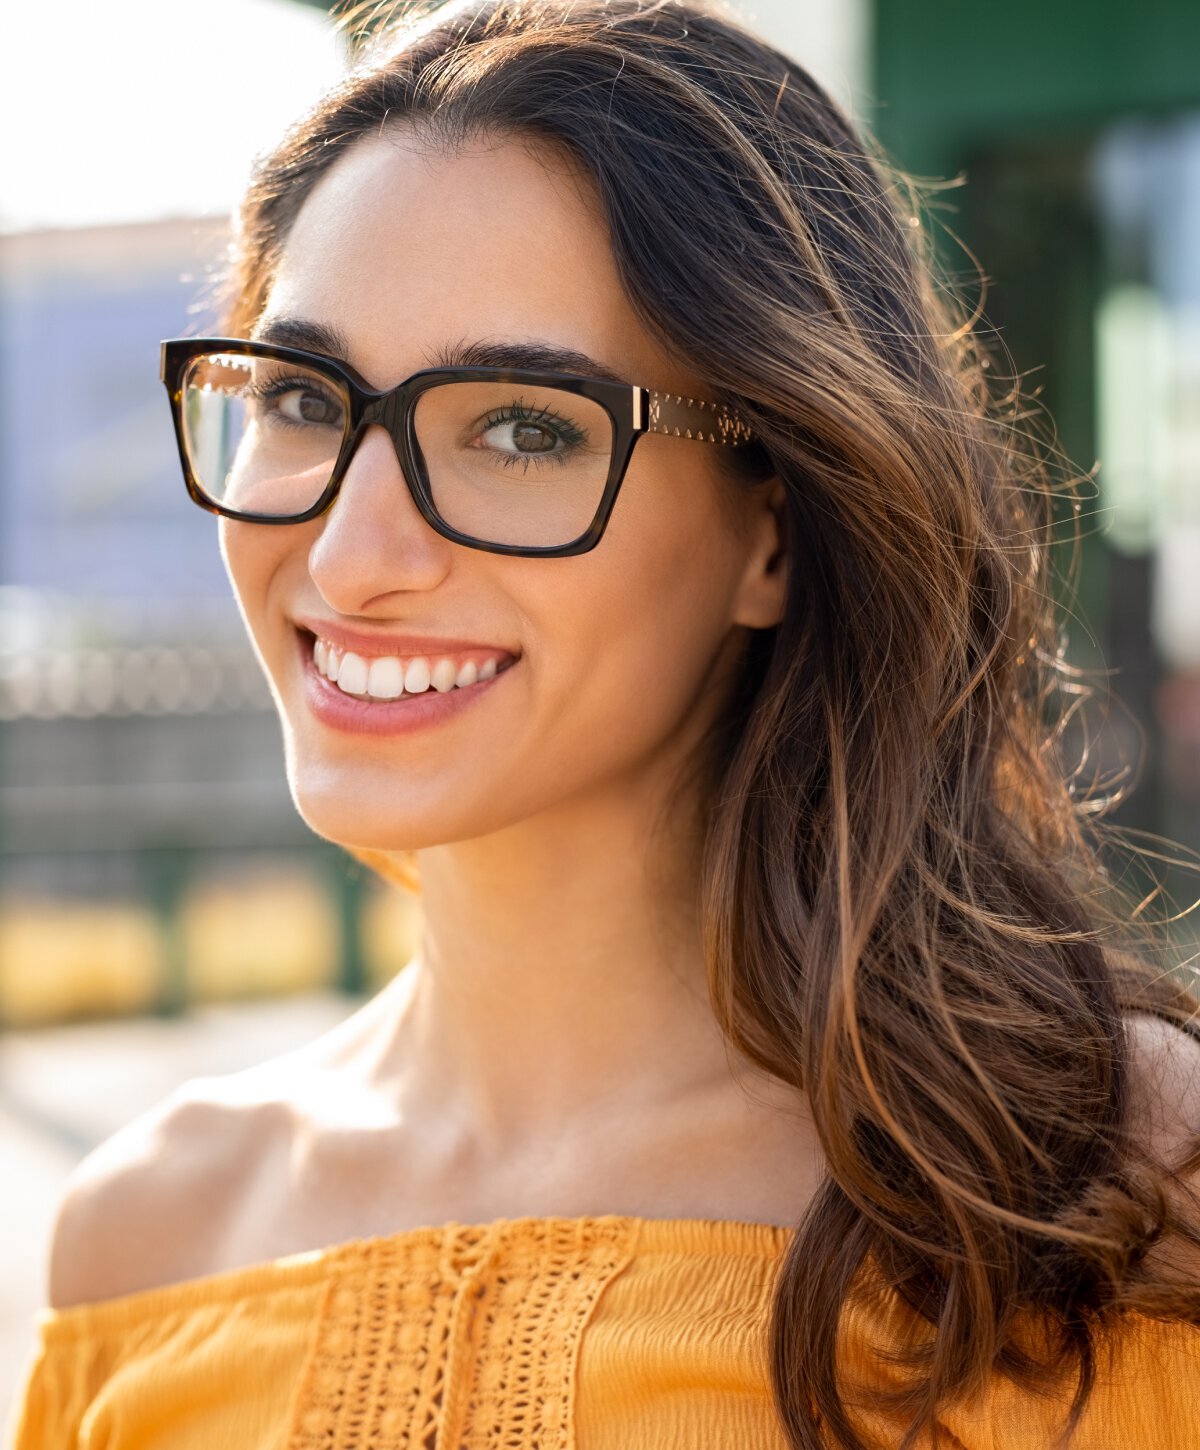 river edge cosmetic dentistry model with brown hair and glasses smiling